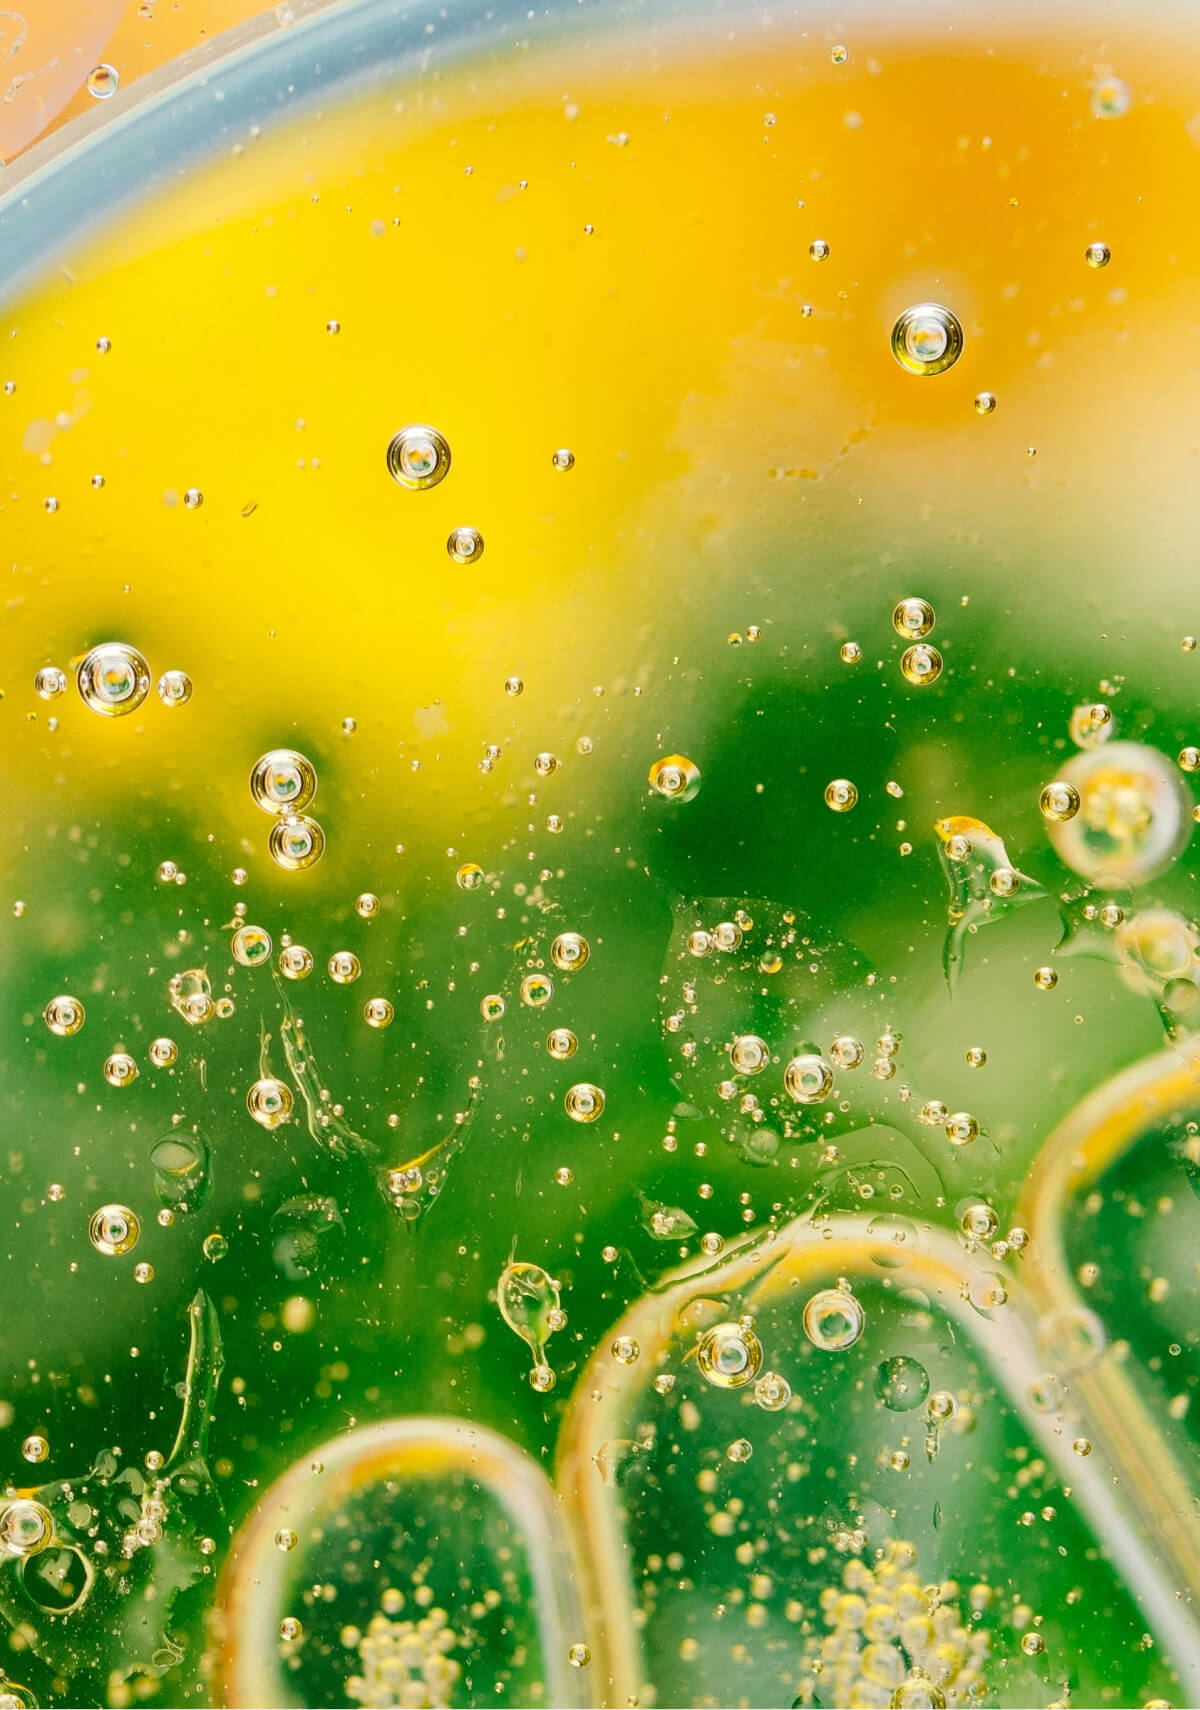 Macro photo of green and yellow liquids combining together